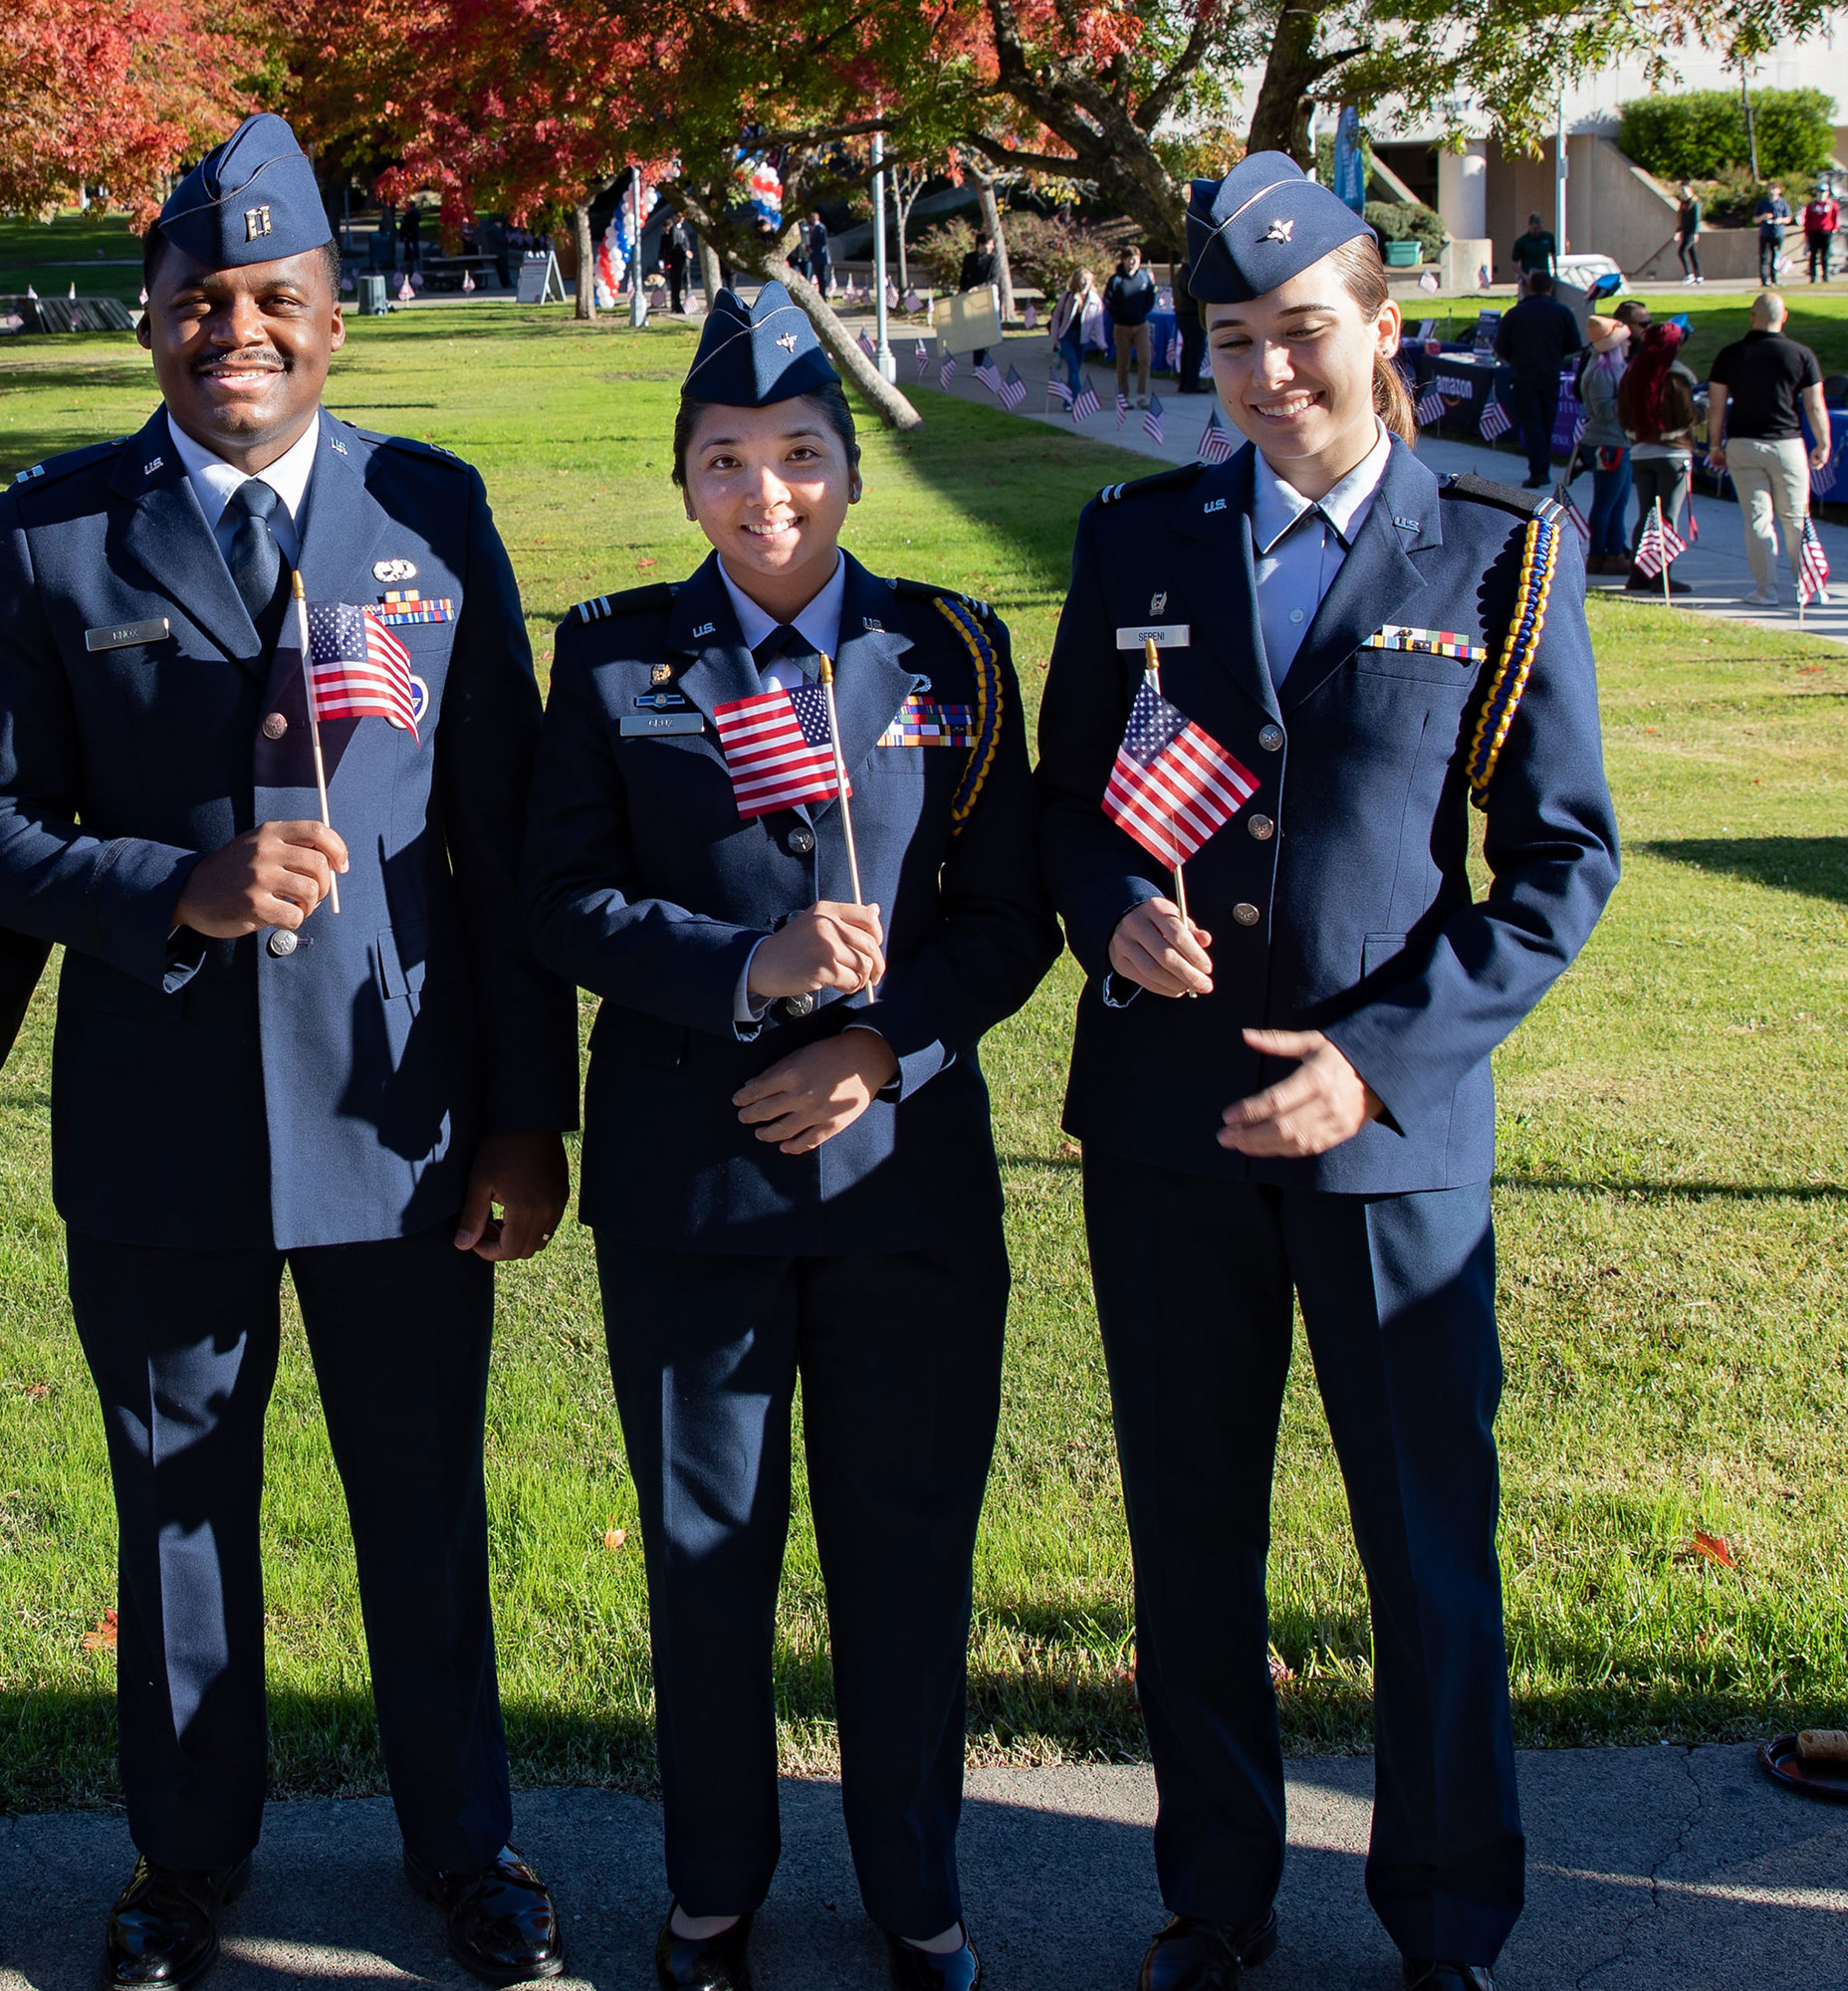 Military personnel attendees at Sierra College Veterans Day ceremony on Rocklin Campus